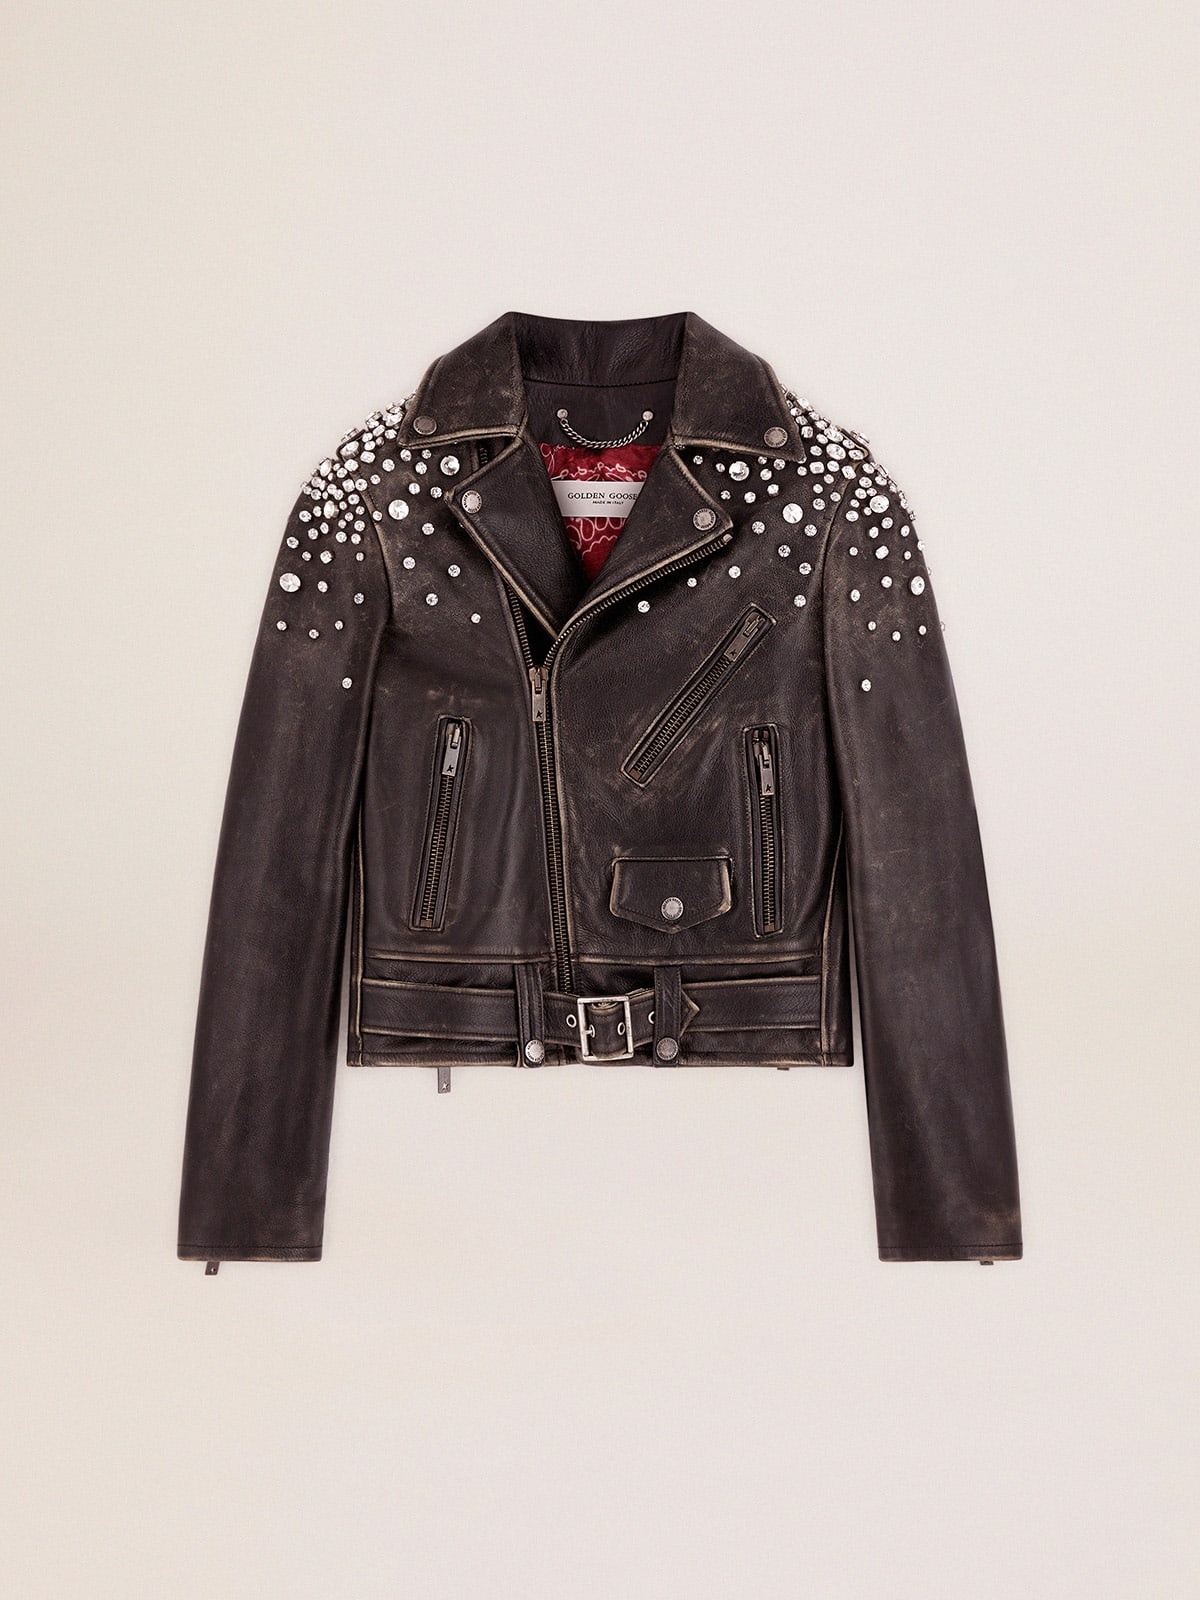 Women's biker jacket in distressed leather with cabochon crystals - 1